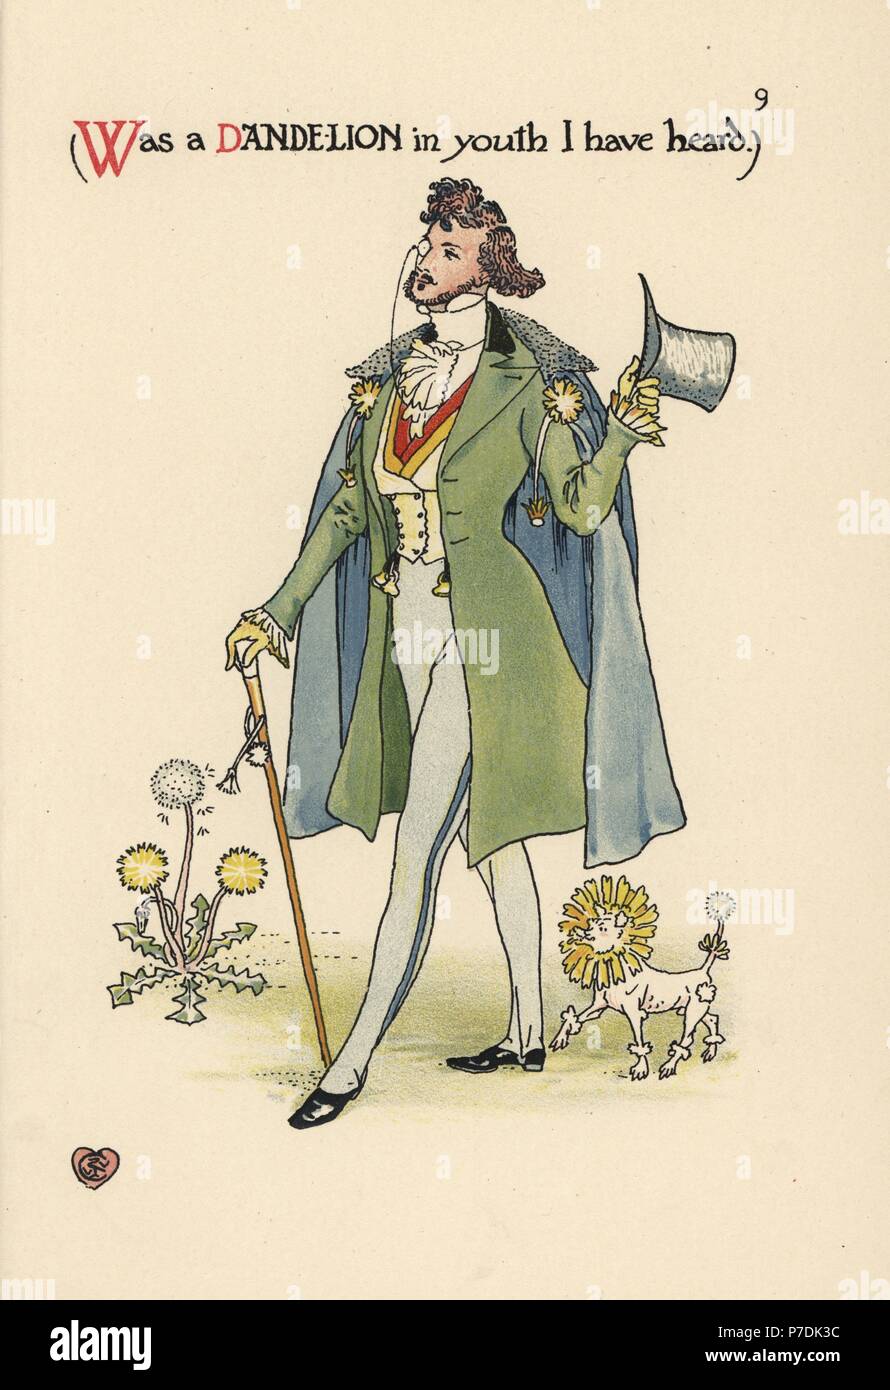 Flower fairy of a dandelion, Taraxacum officinale, as a fashionable young dandy with poodle. Chromolithograph after an illustration by Walter Crane from A Flower Wedding, Cassell, London, 1905. Stock Photo